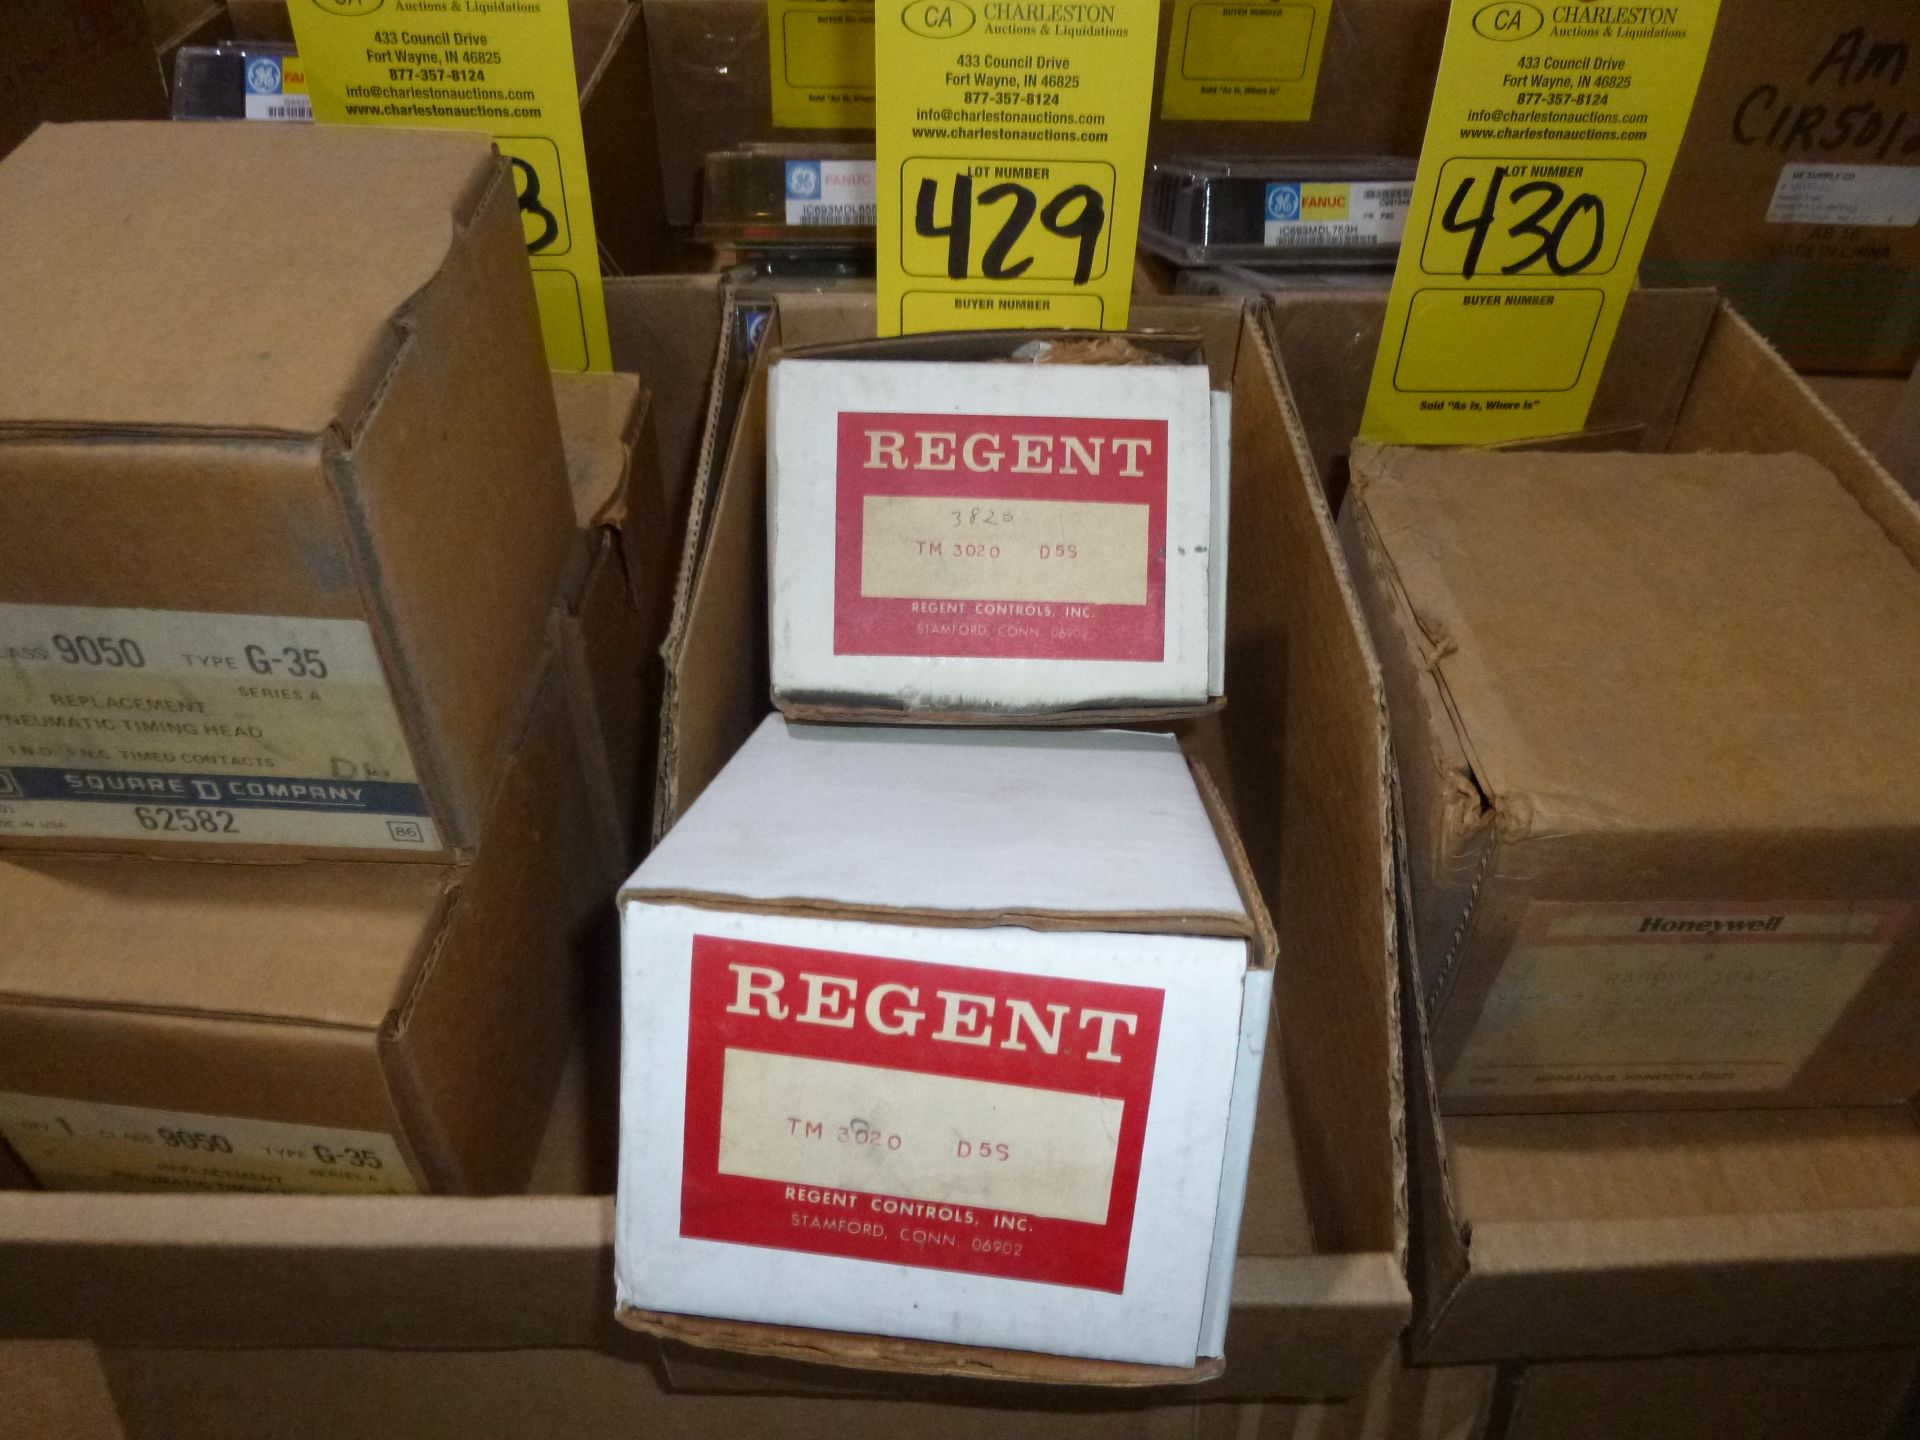 Qty 2 Regent model TM-3020-D5S, new in boxes, as always with Brolyn LLC auctions, all lots can be